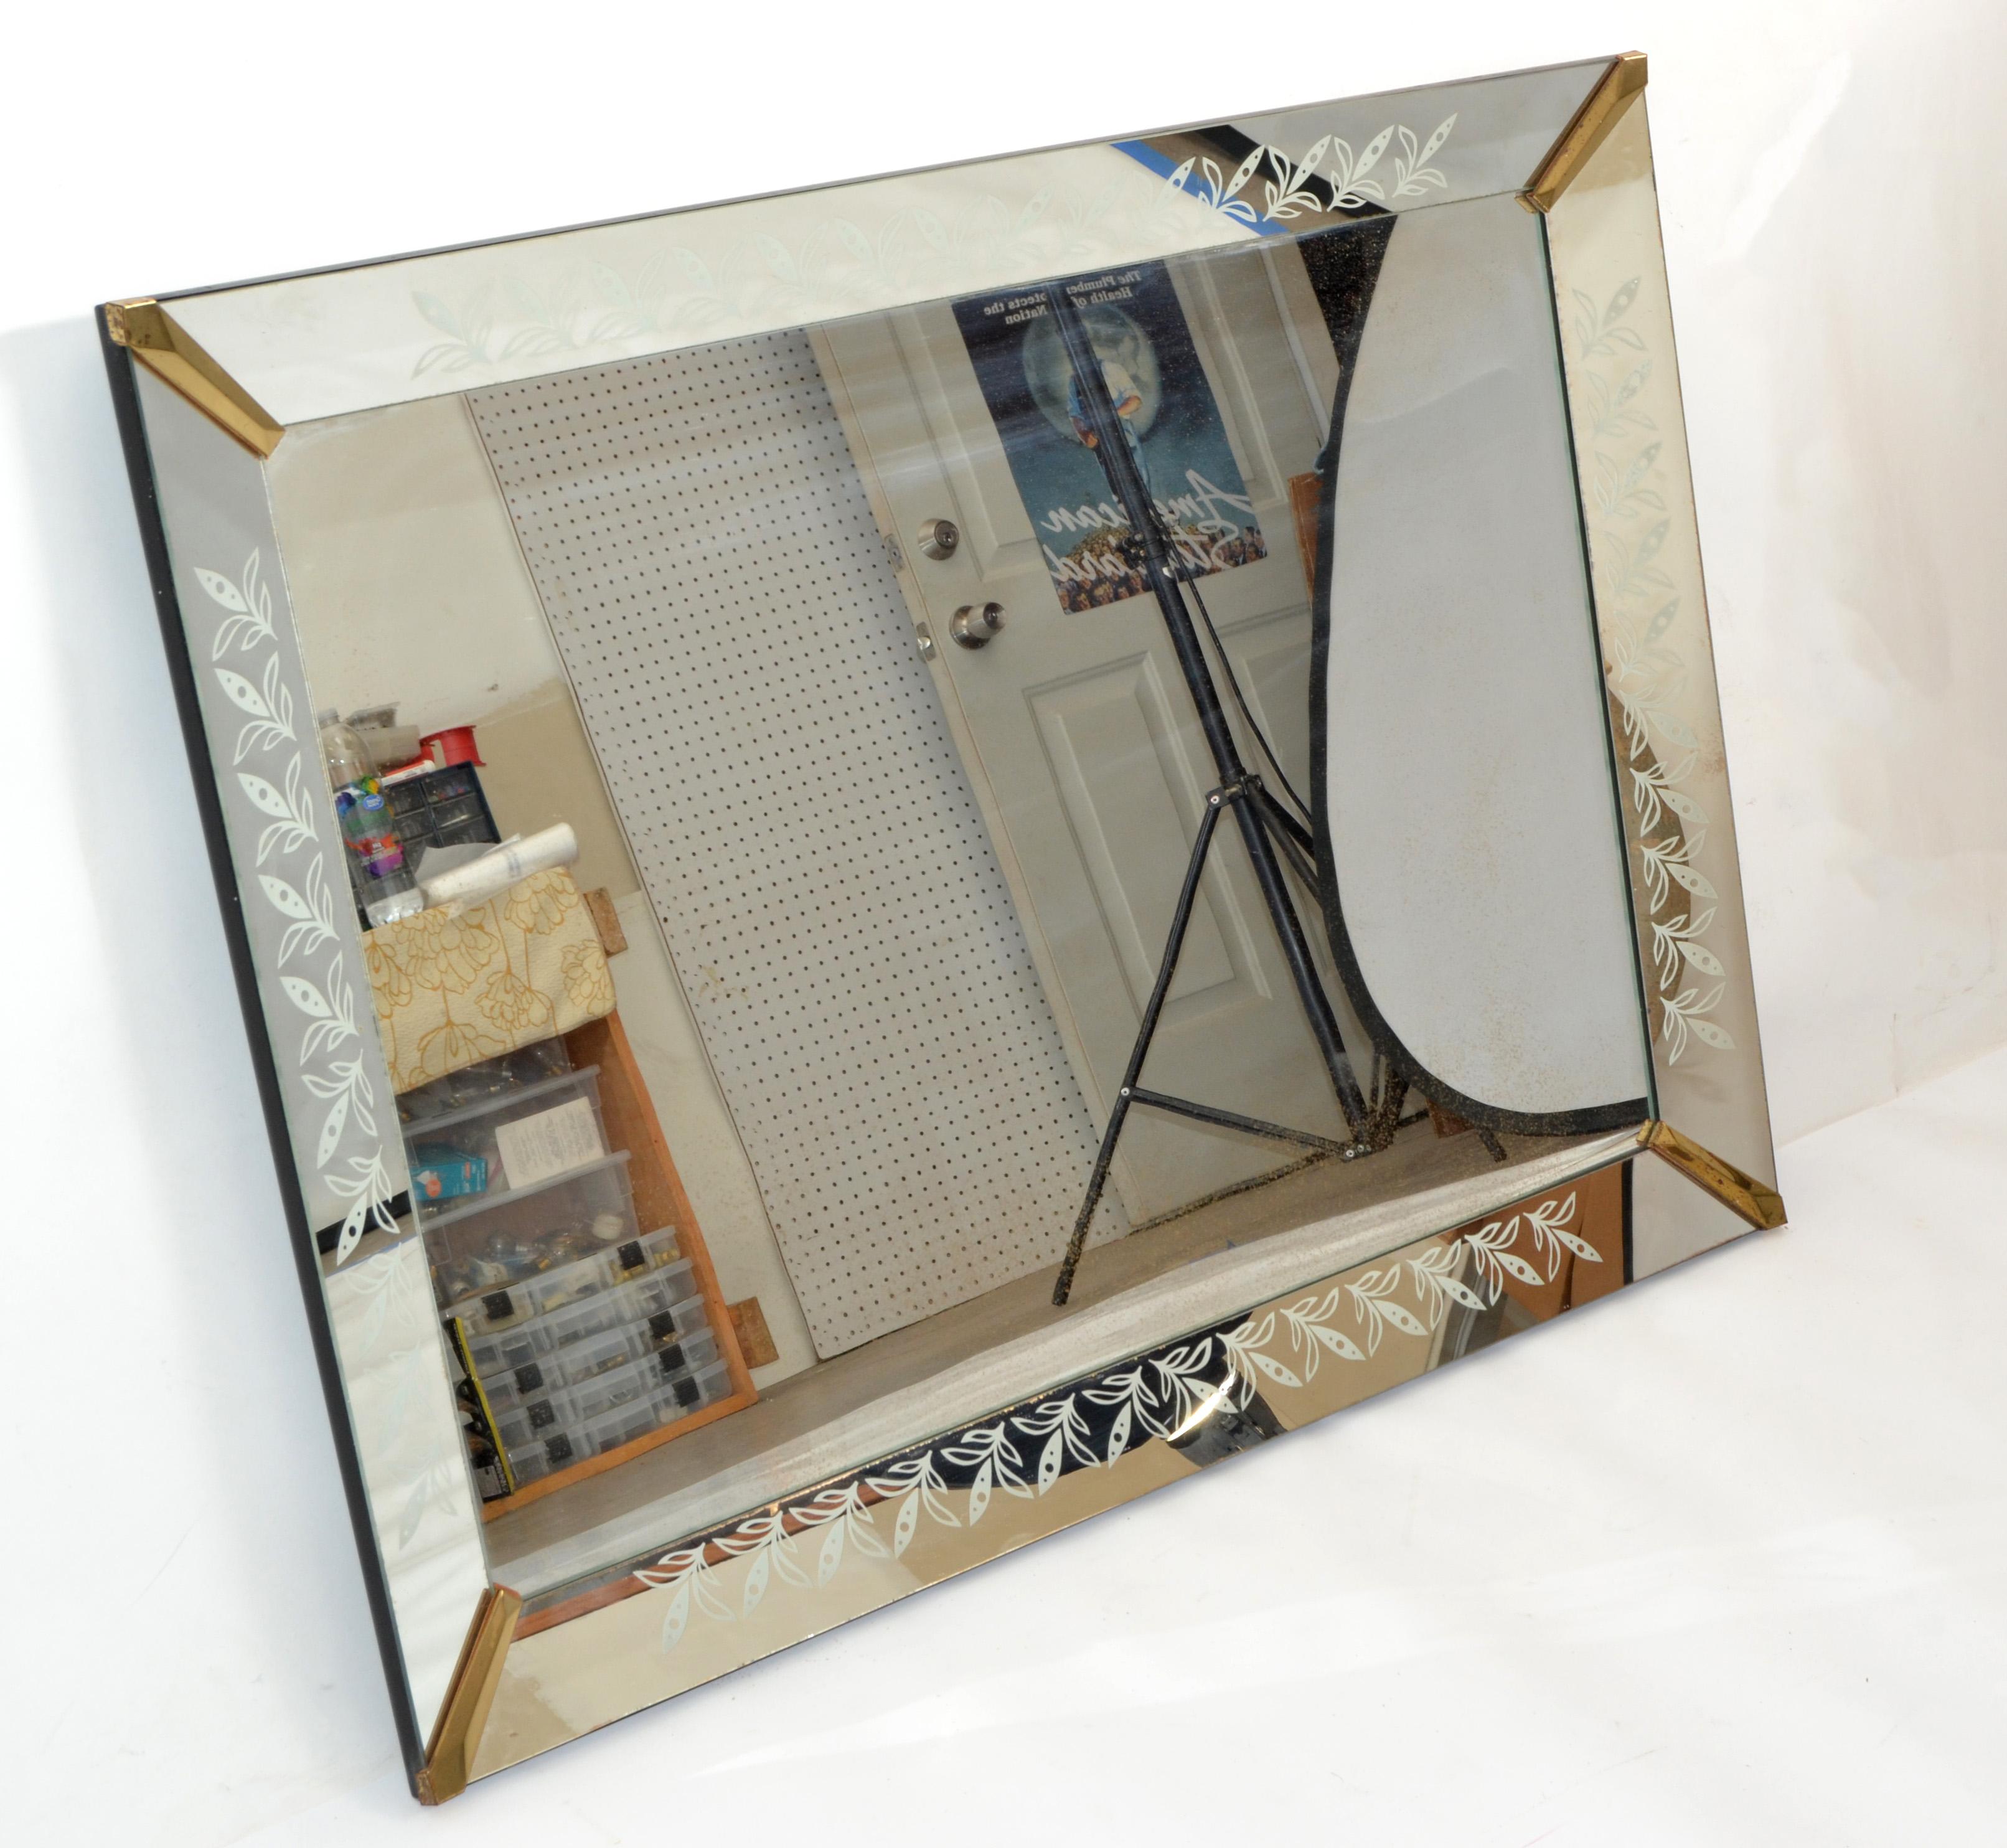 1940s Art Deco Venetian Style Etched Wall Mirror with Brass Finished Corners For Sale 4